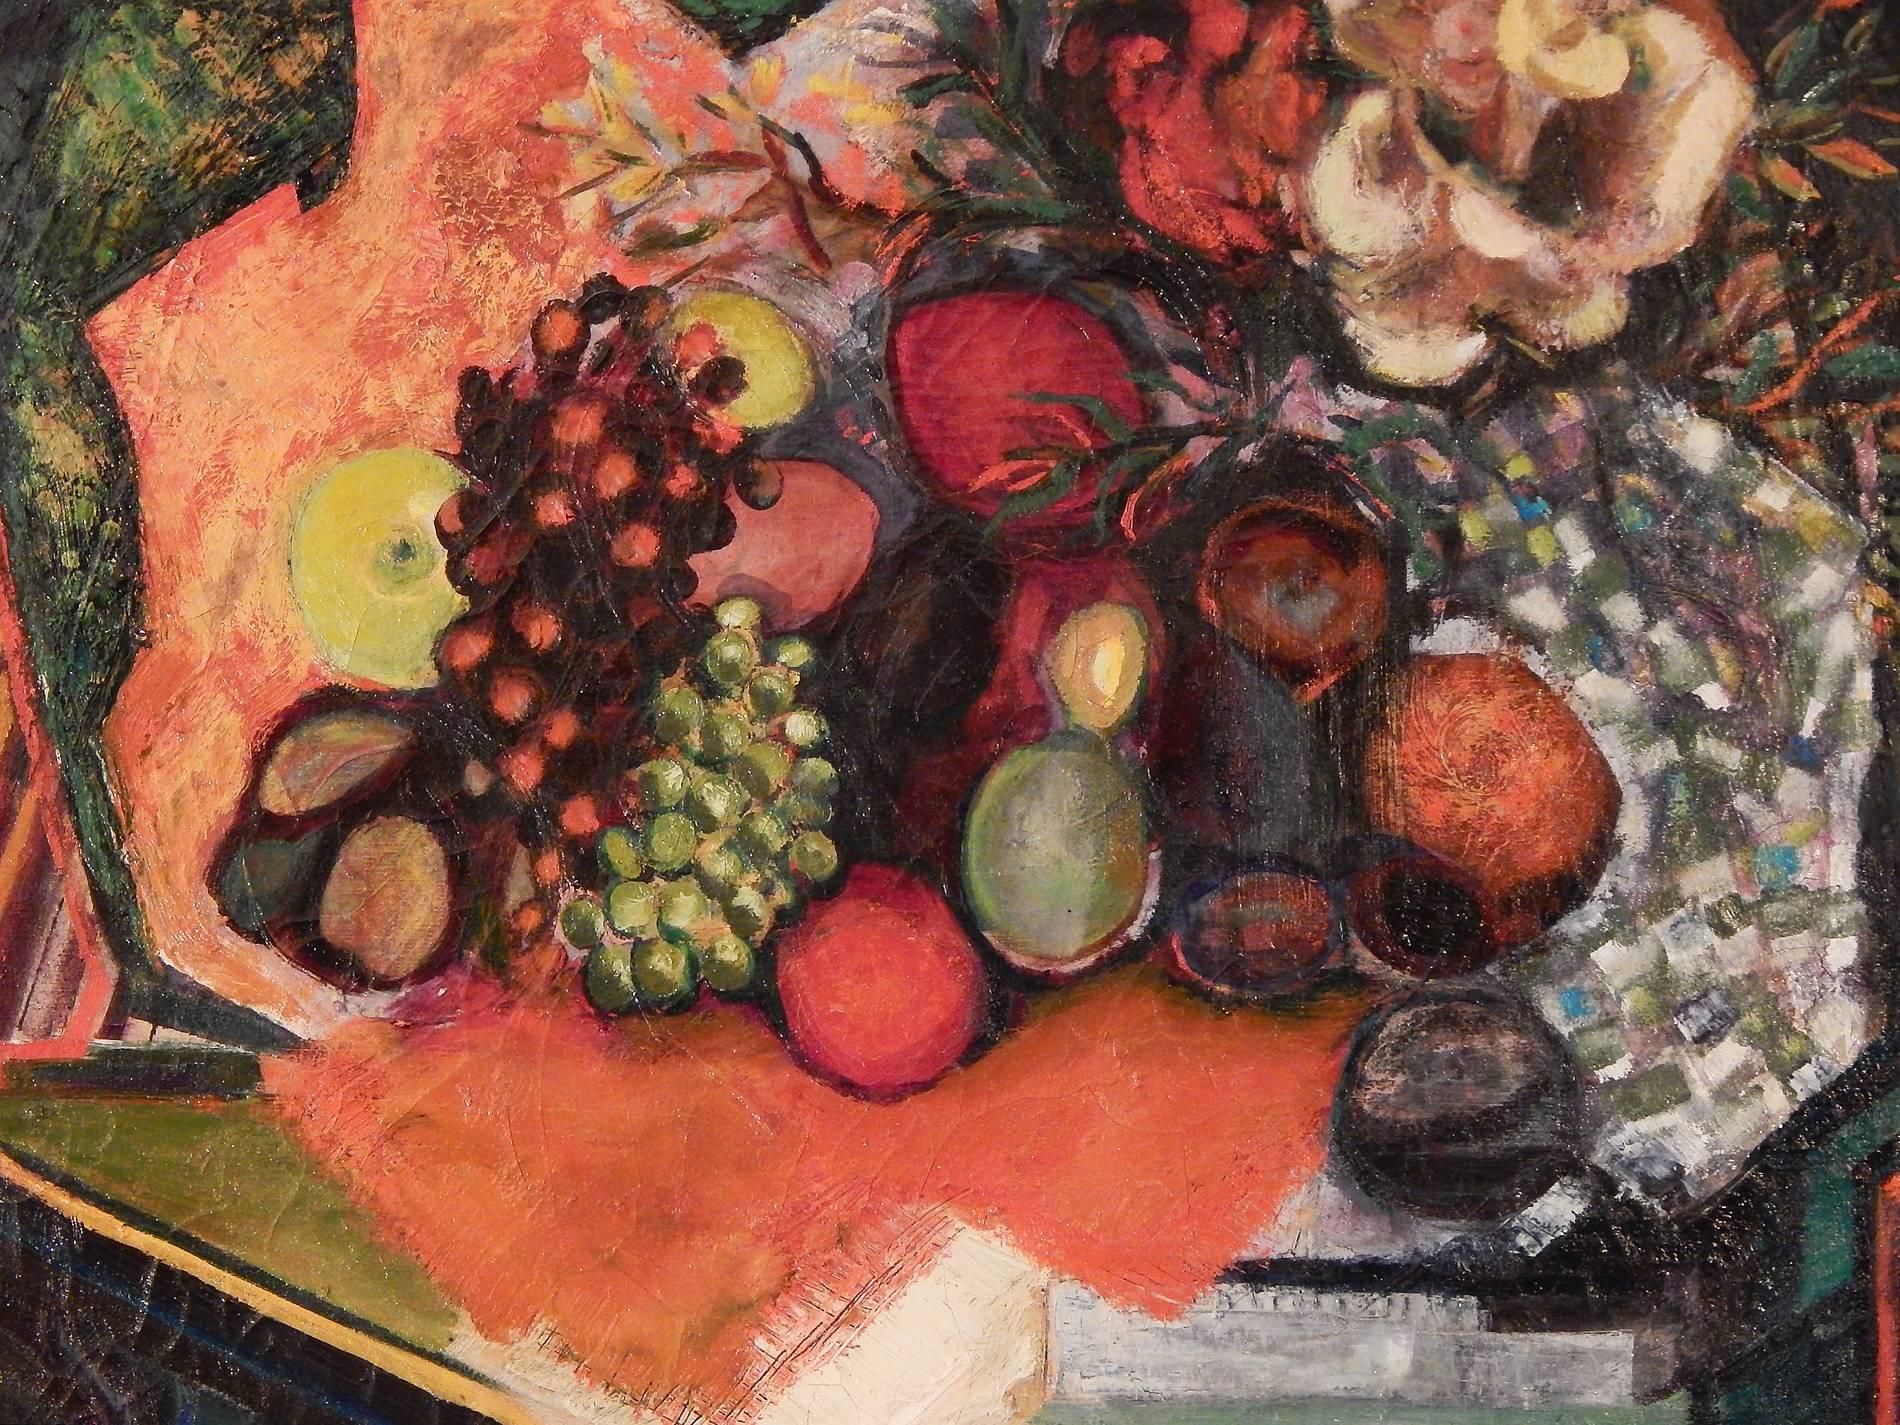 A brilliant example of American Cubism, this vividly-hued still life depicts an autumnal array of fruit, green and red grapes, lemons, figs and persimmons, on a table with a blue-and-green checked cloth. The palette of oranges, greens and blues is